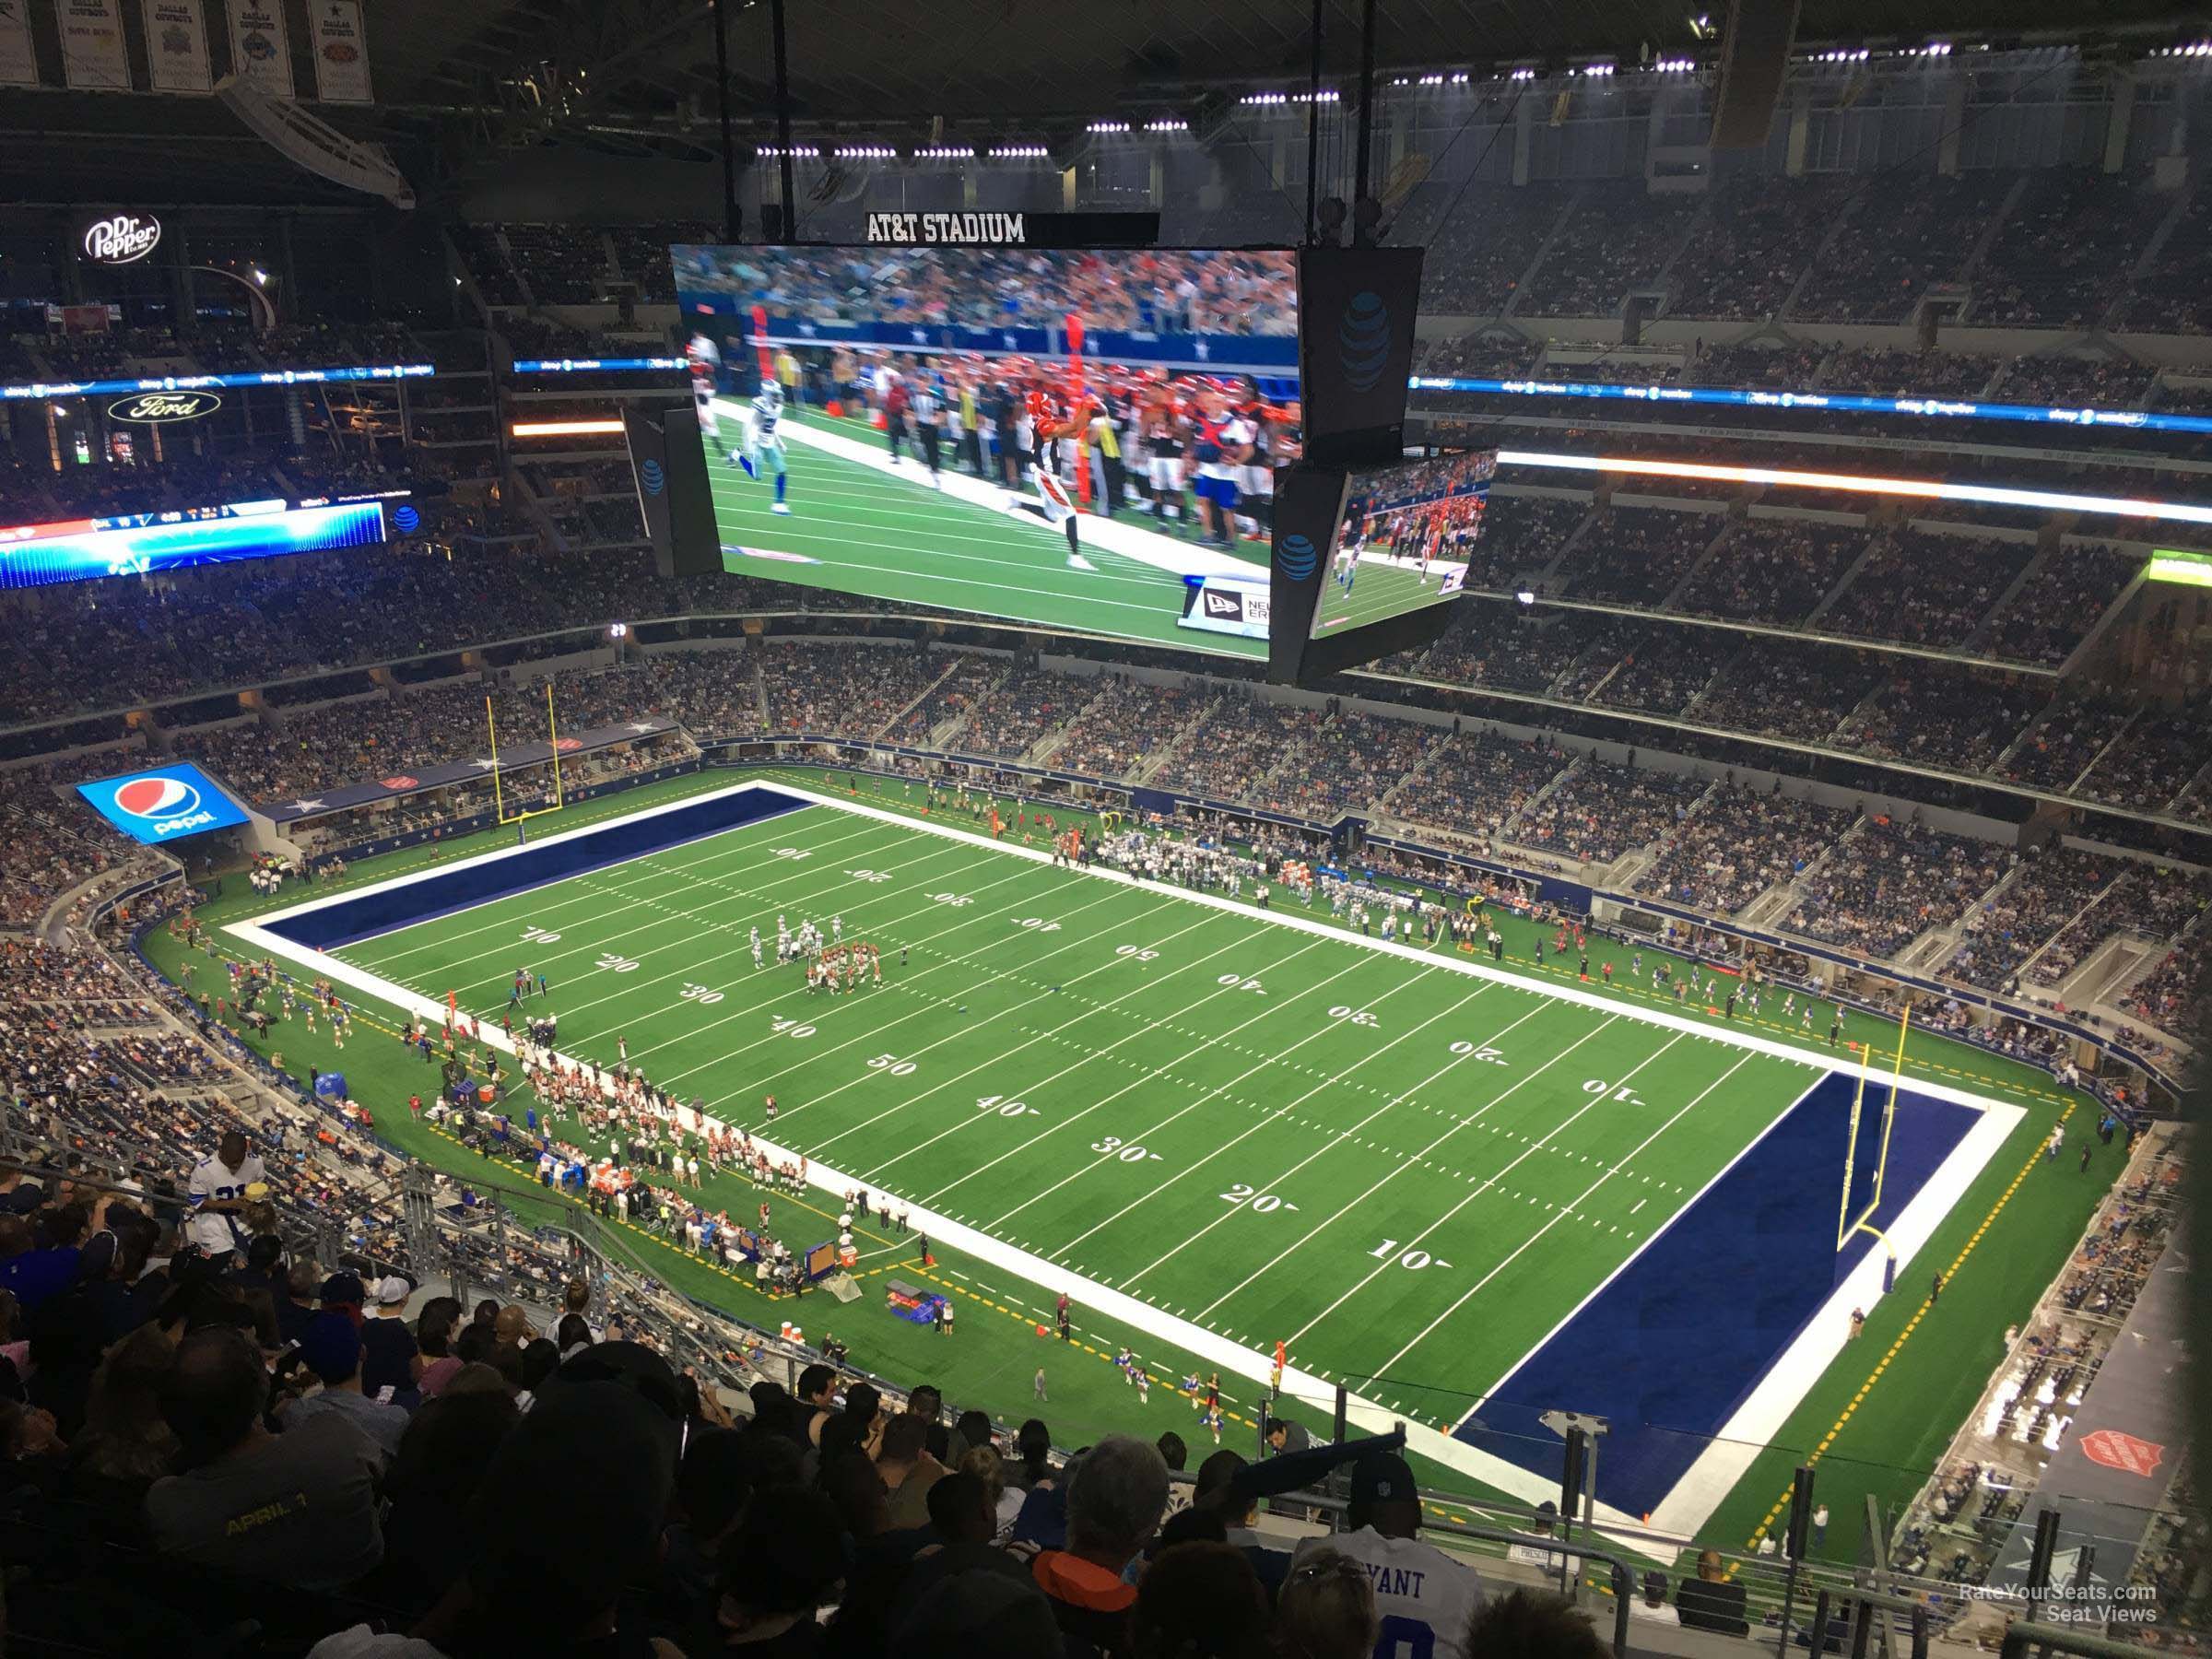 section 425, row 22 seat view  for football - at&t stadium (cowboys stadium)